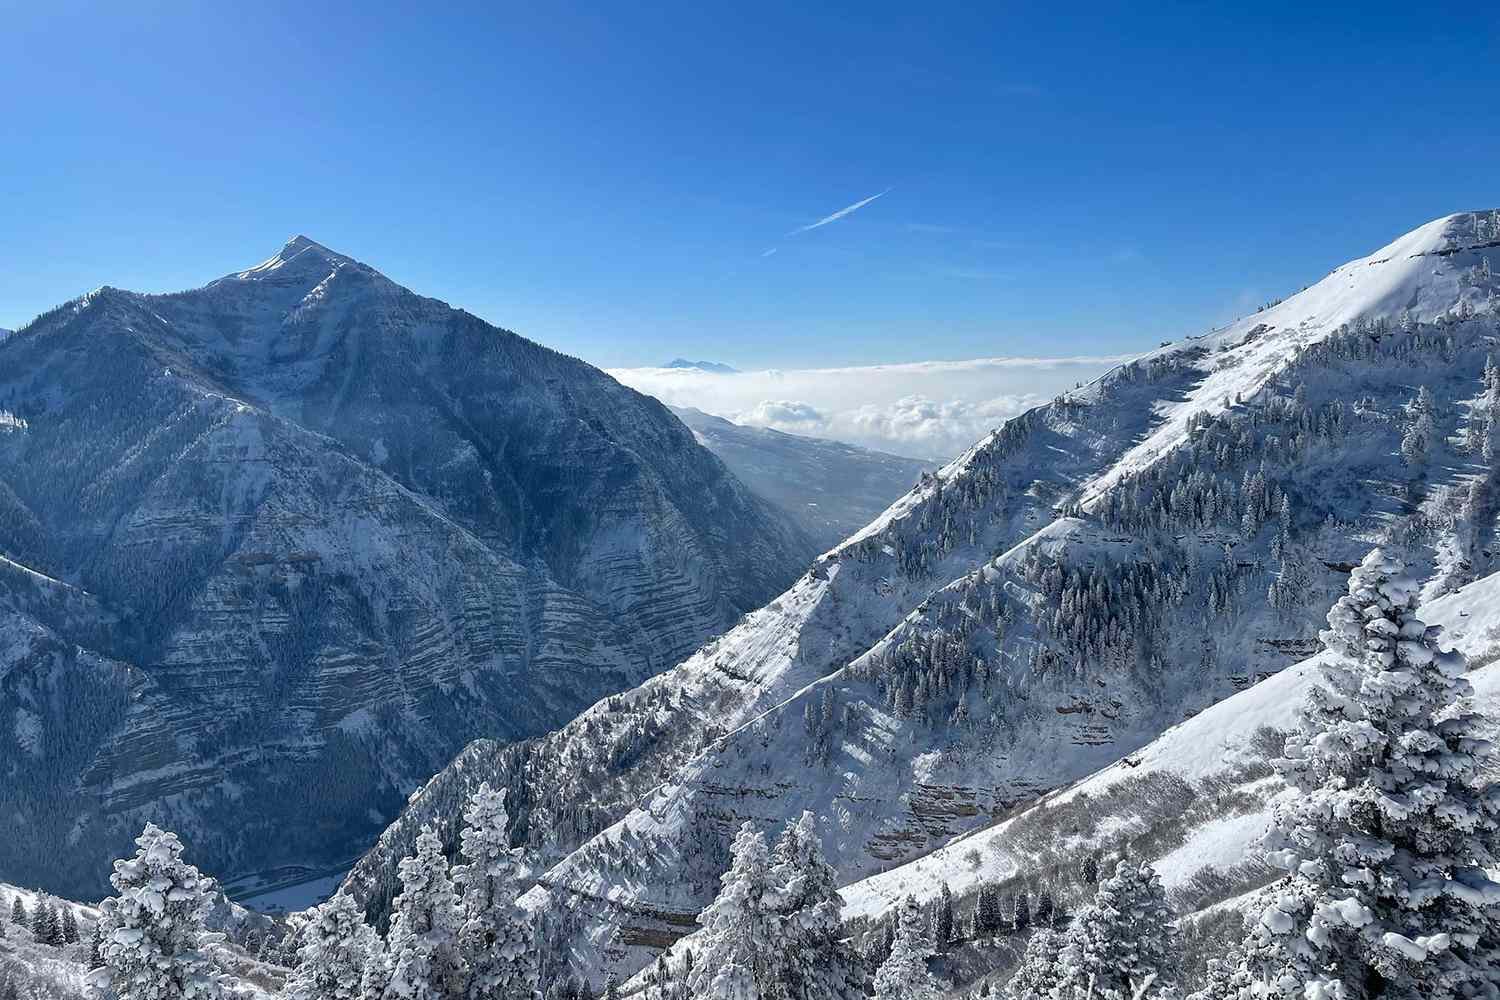 This Utah Ski Resort Has All of the Powder With None of the Lift Lines